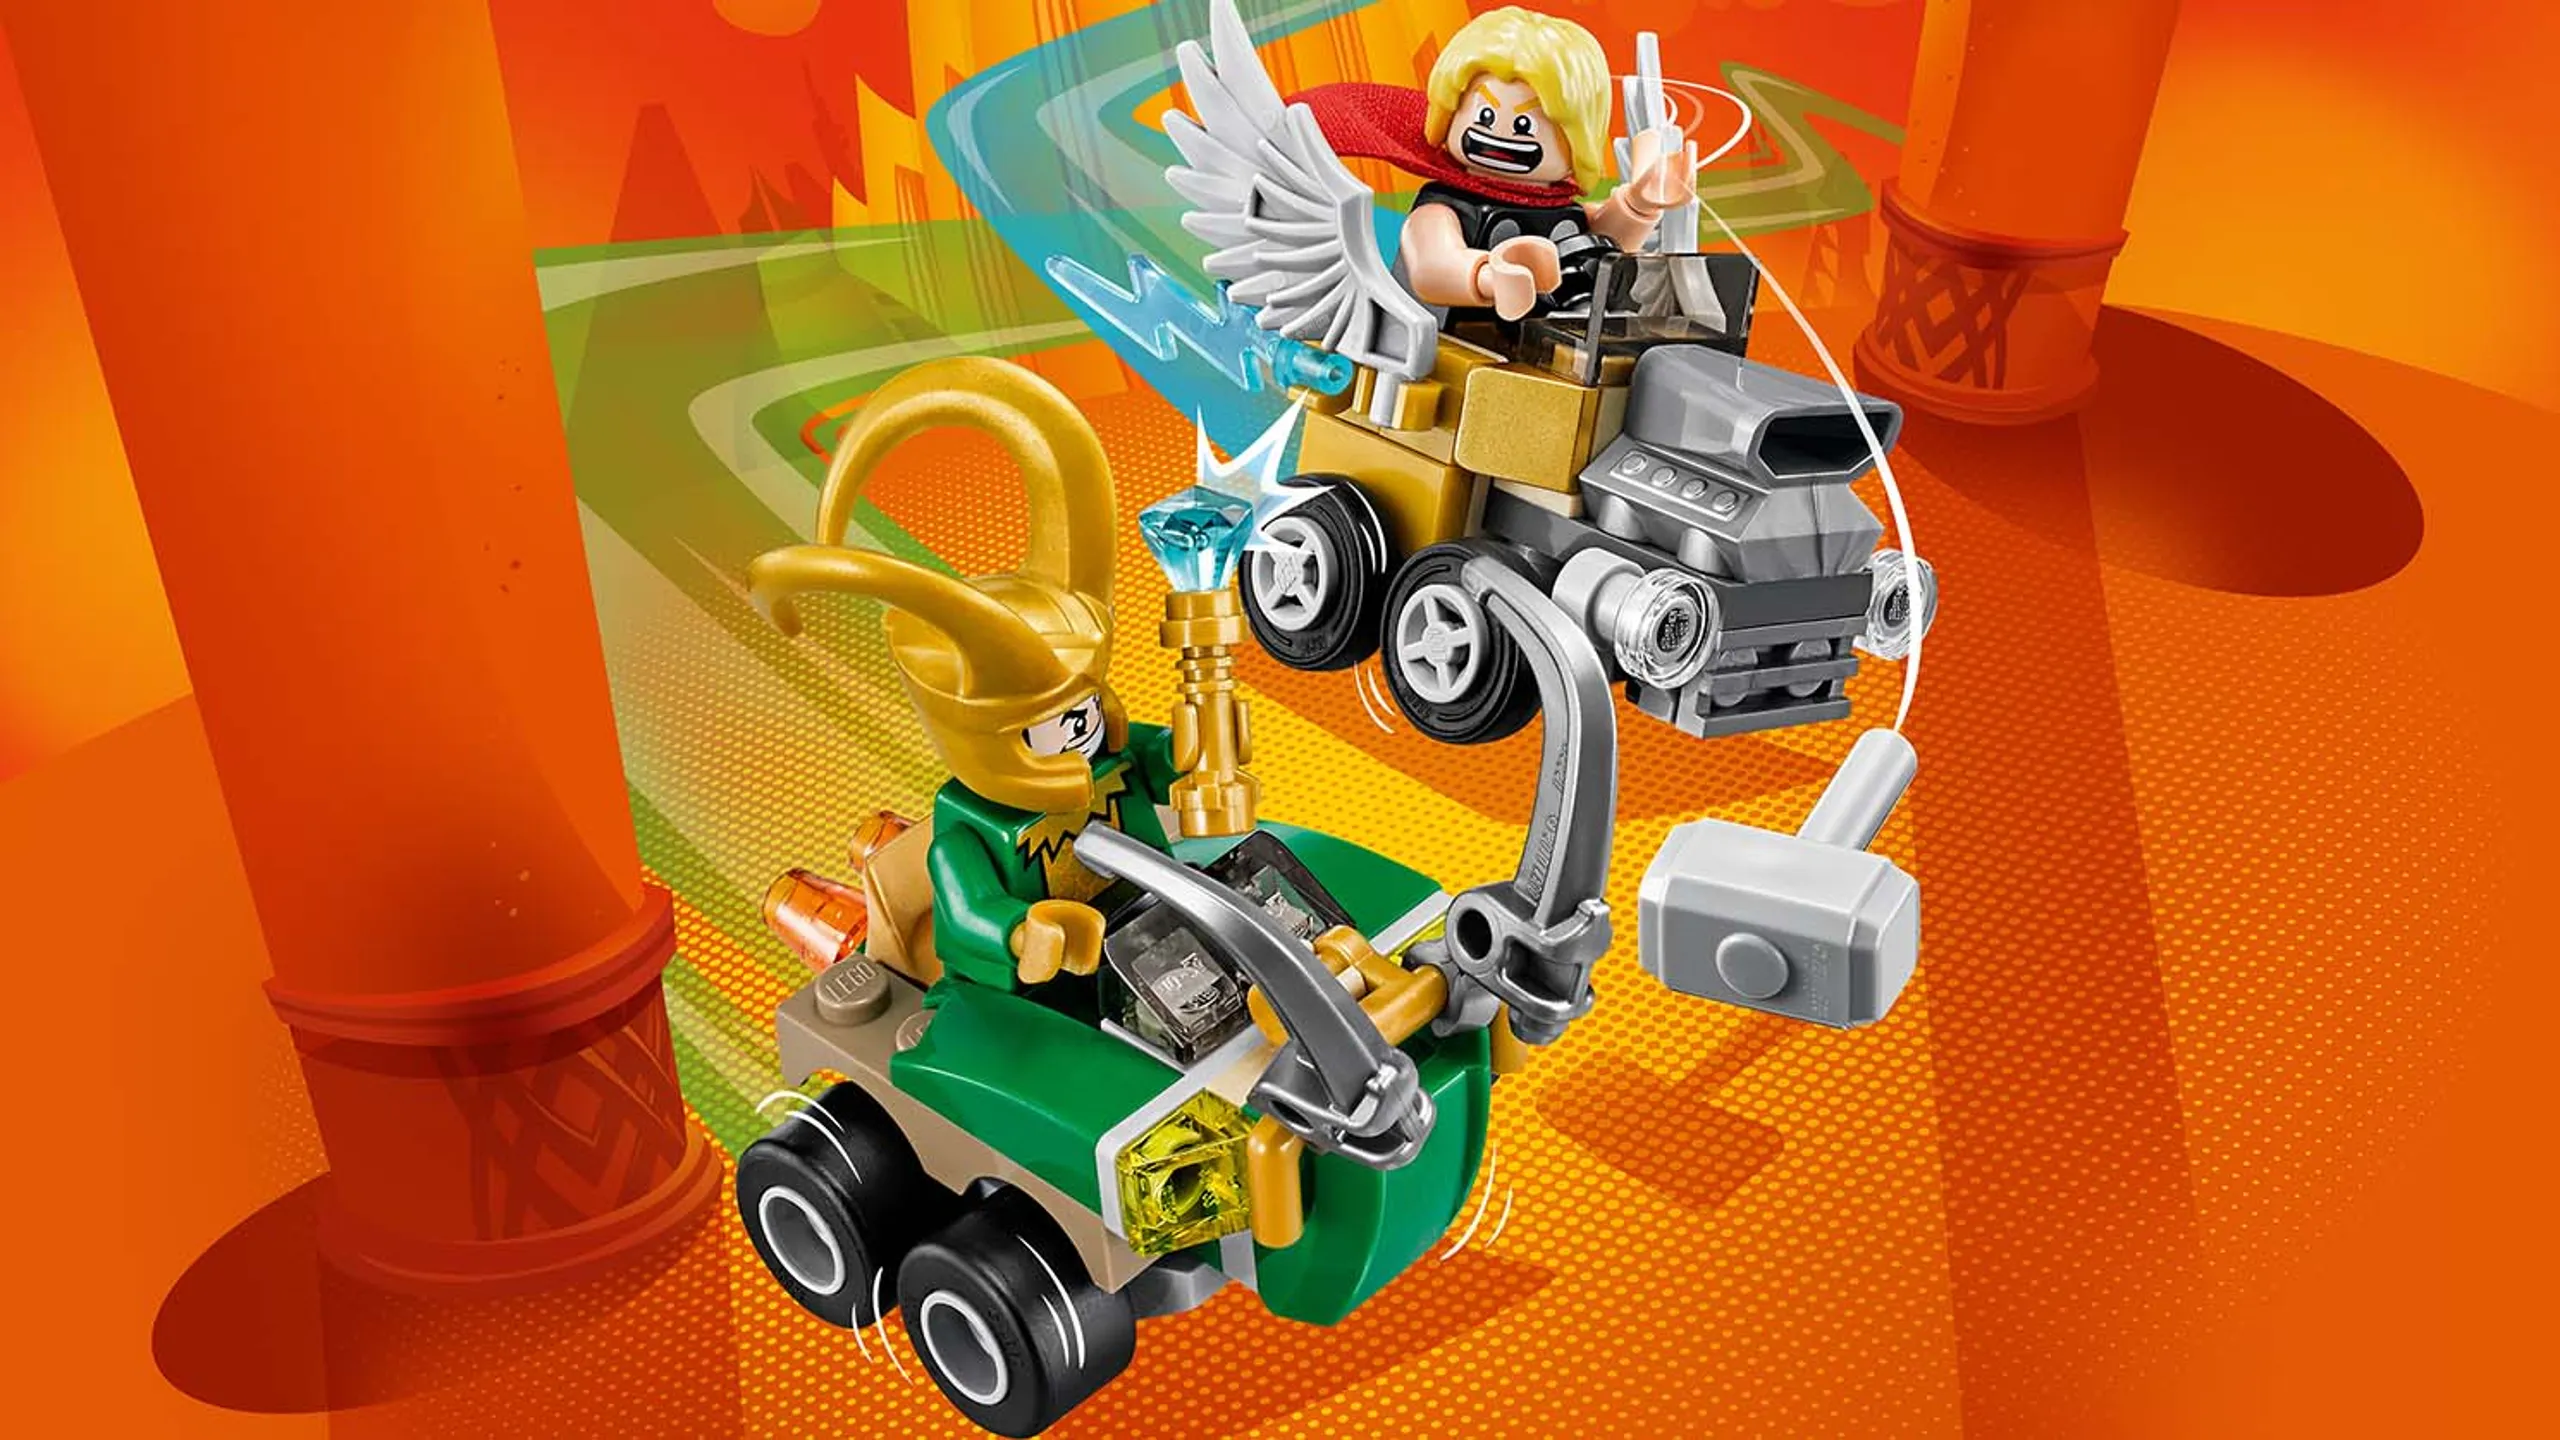 LEGO MARVEL Super Heroes Thor vs Loki - 76091 - Thor and Loki fights a great battle in their race cars including Thor's hammer and Loki's magic stick